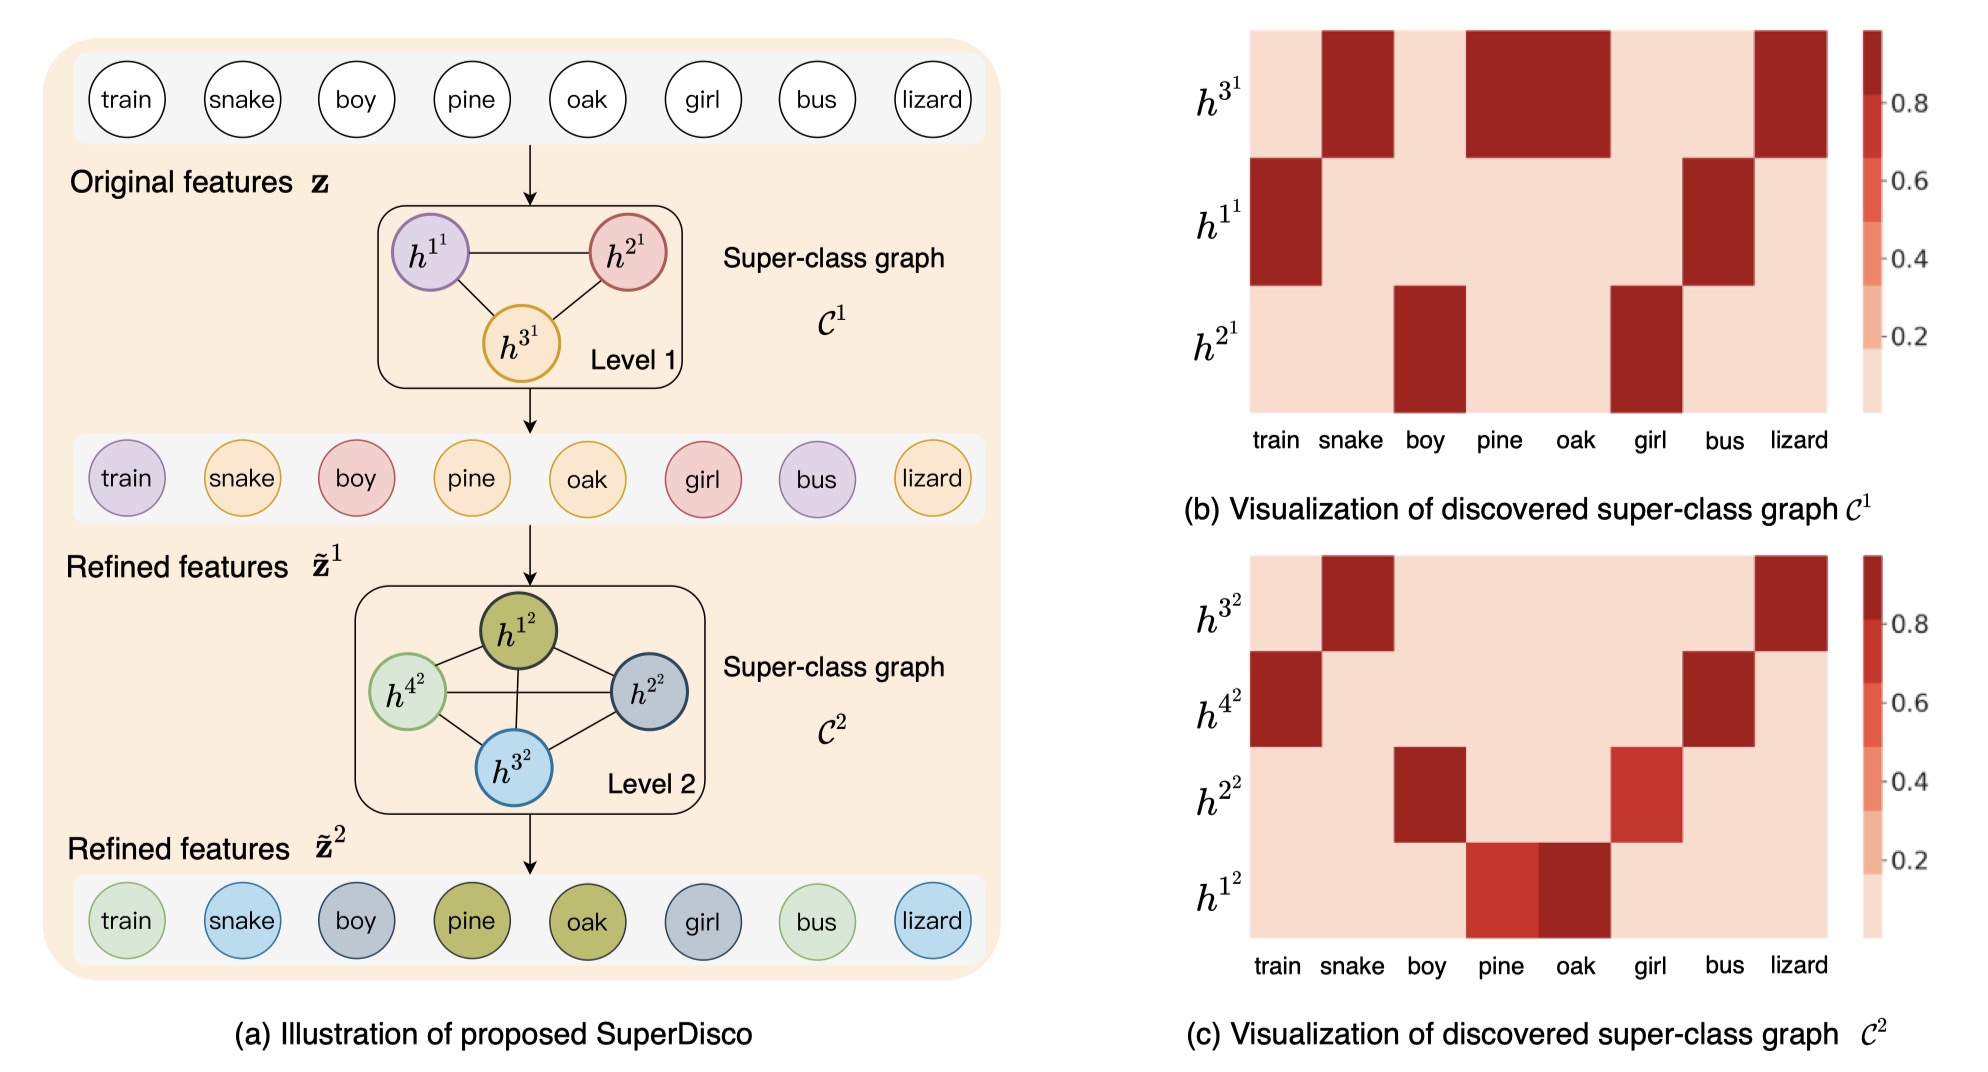 SuperDisco: Super-Class Discovery Improves Visual Recognition for the Long-Tail